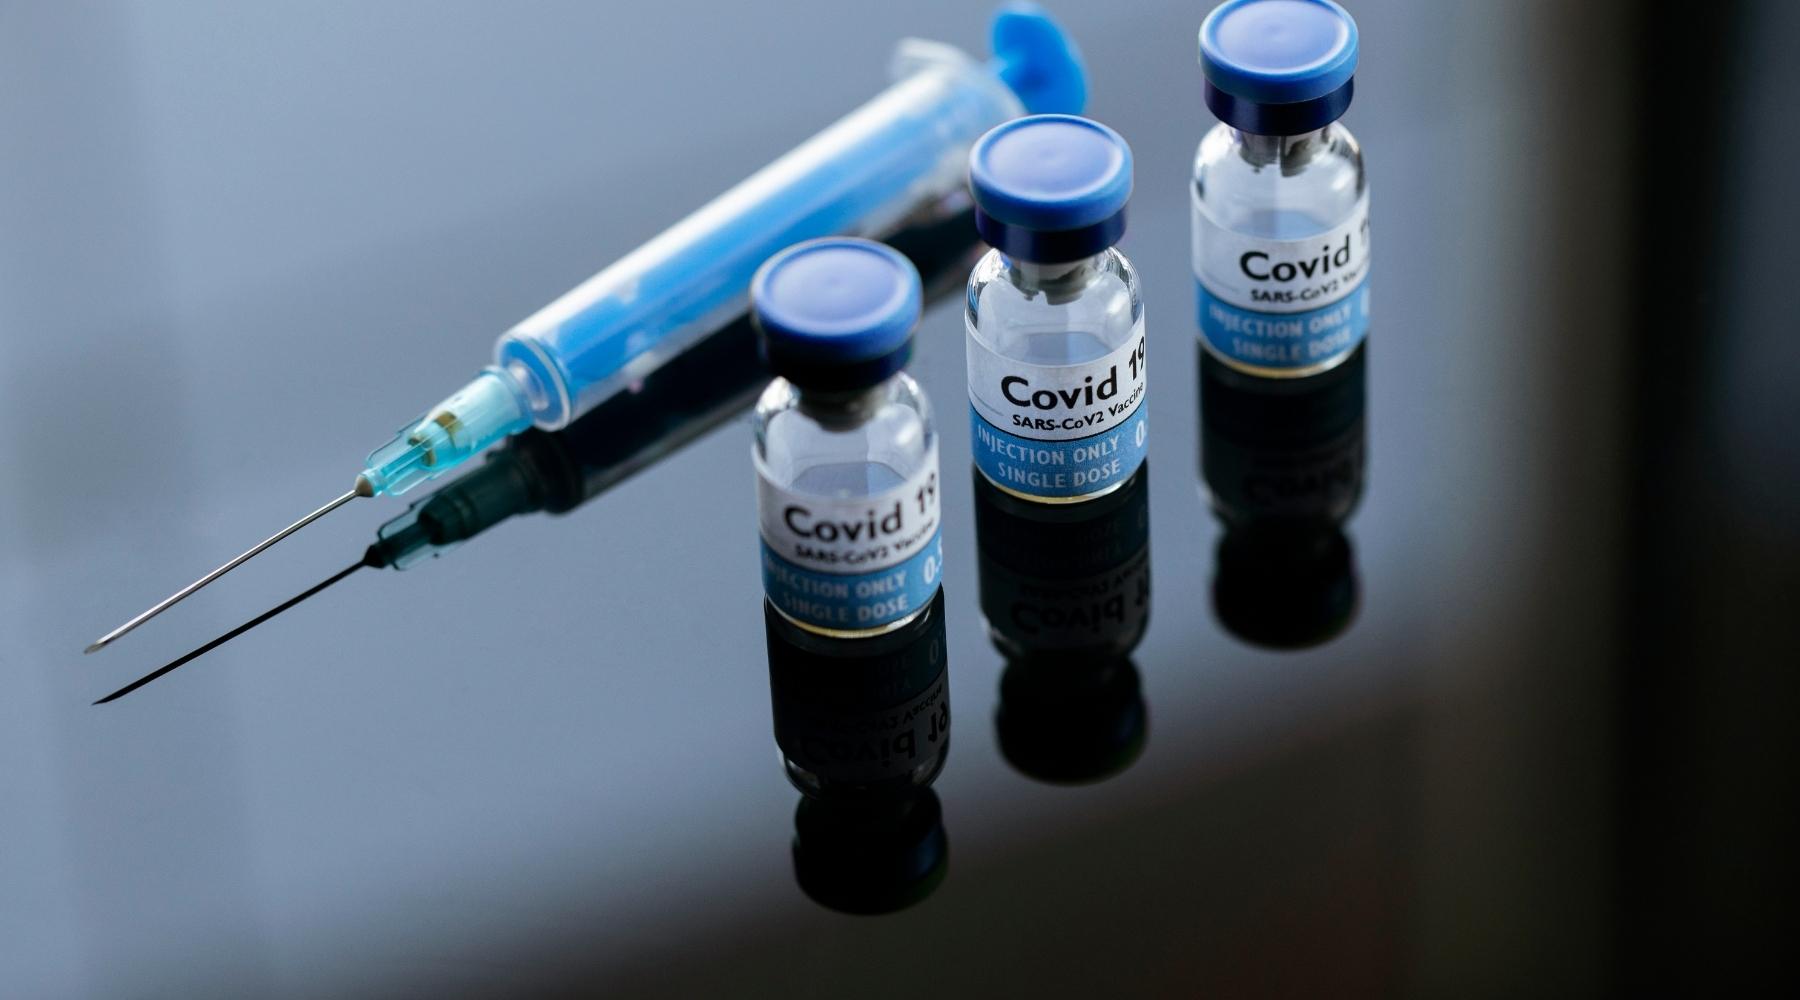 Mature Minors and COVID-19 Vaccination